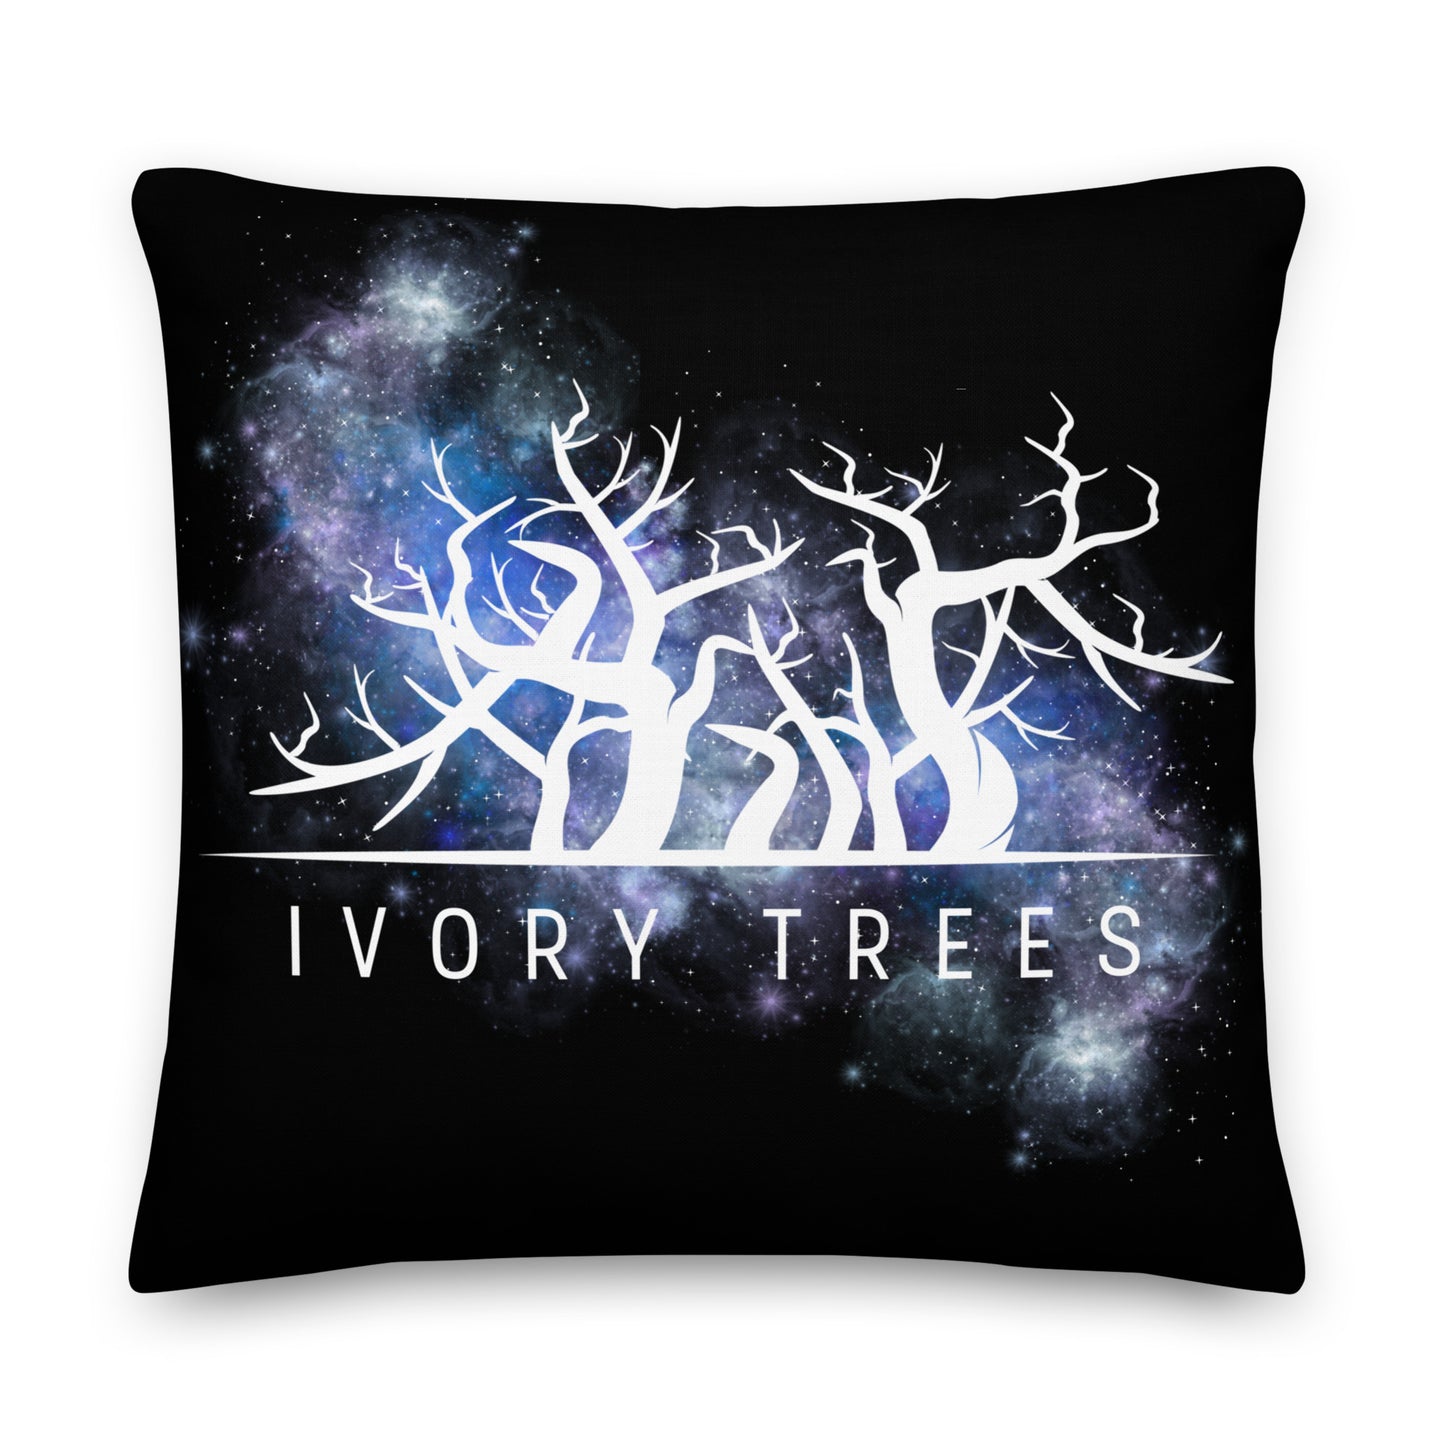 IVORY TREES NEBULA Premium Pillow - The Diving Universe by Kristine Kathryn Rusch